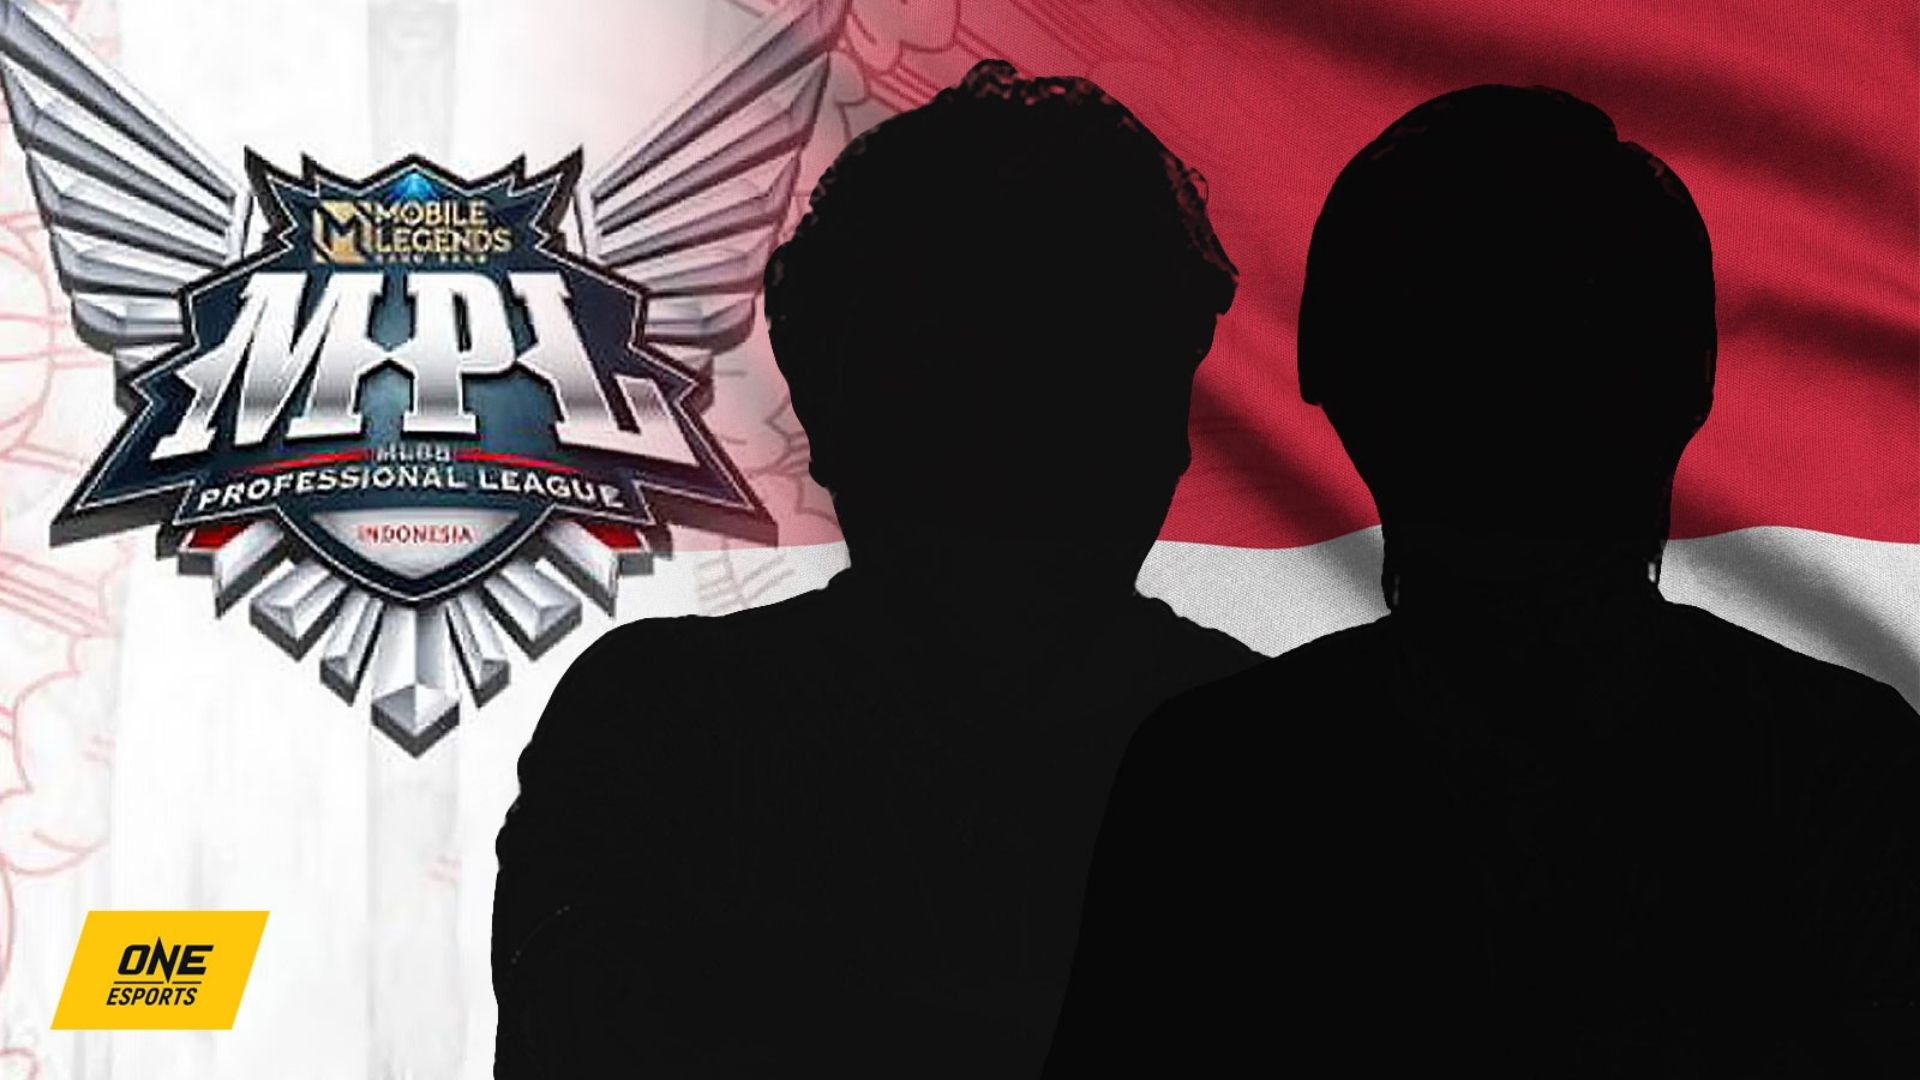 A well-known MPL PH roamer and jungler are set to headline Geek Fams MPL ID Season 10 roster ONE Esports